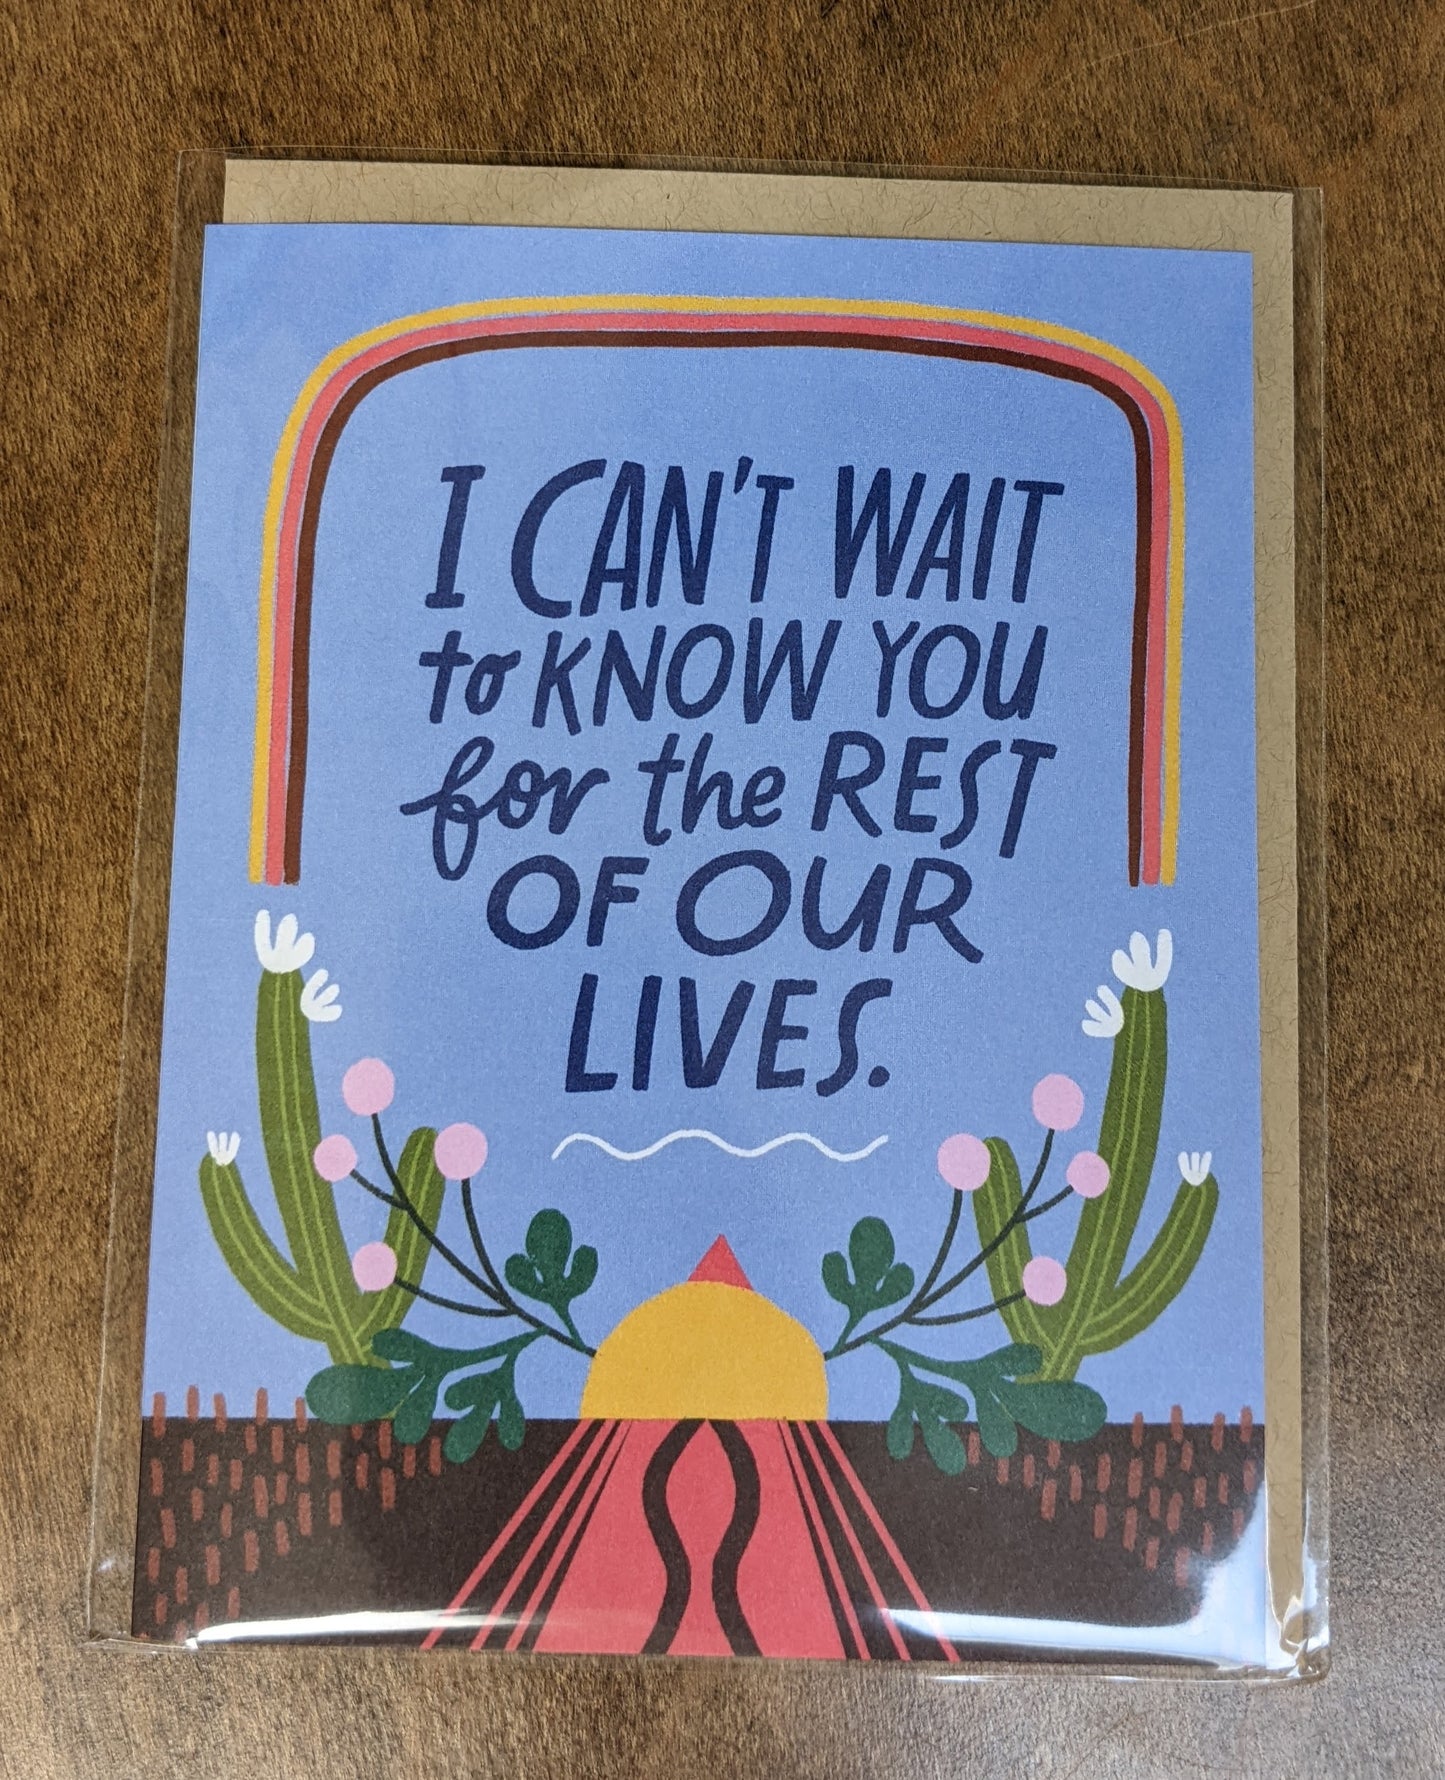 Love card reading "I Can't wait to know you for the rest of our lives" by Emily McDowell